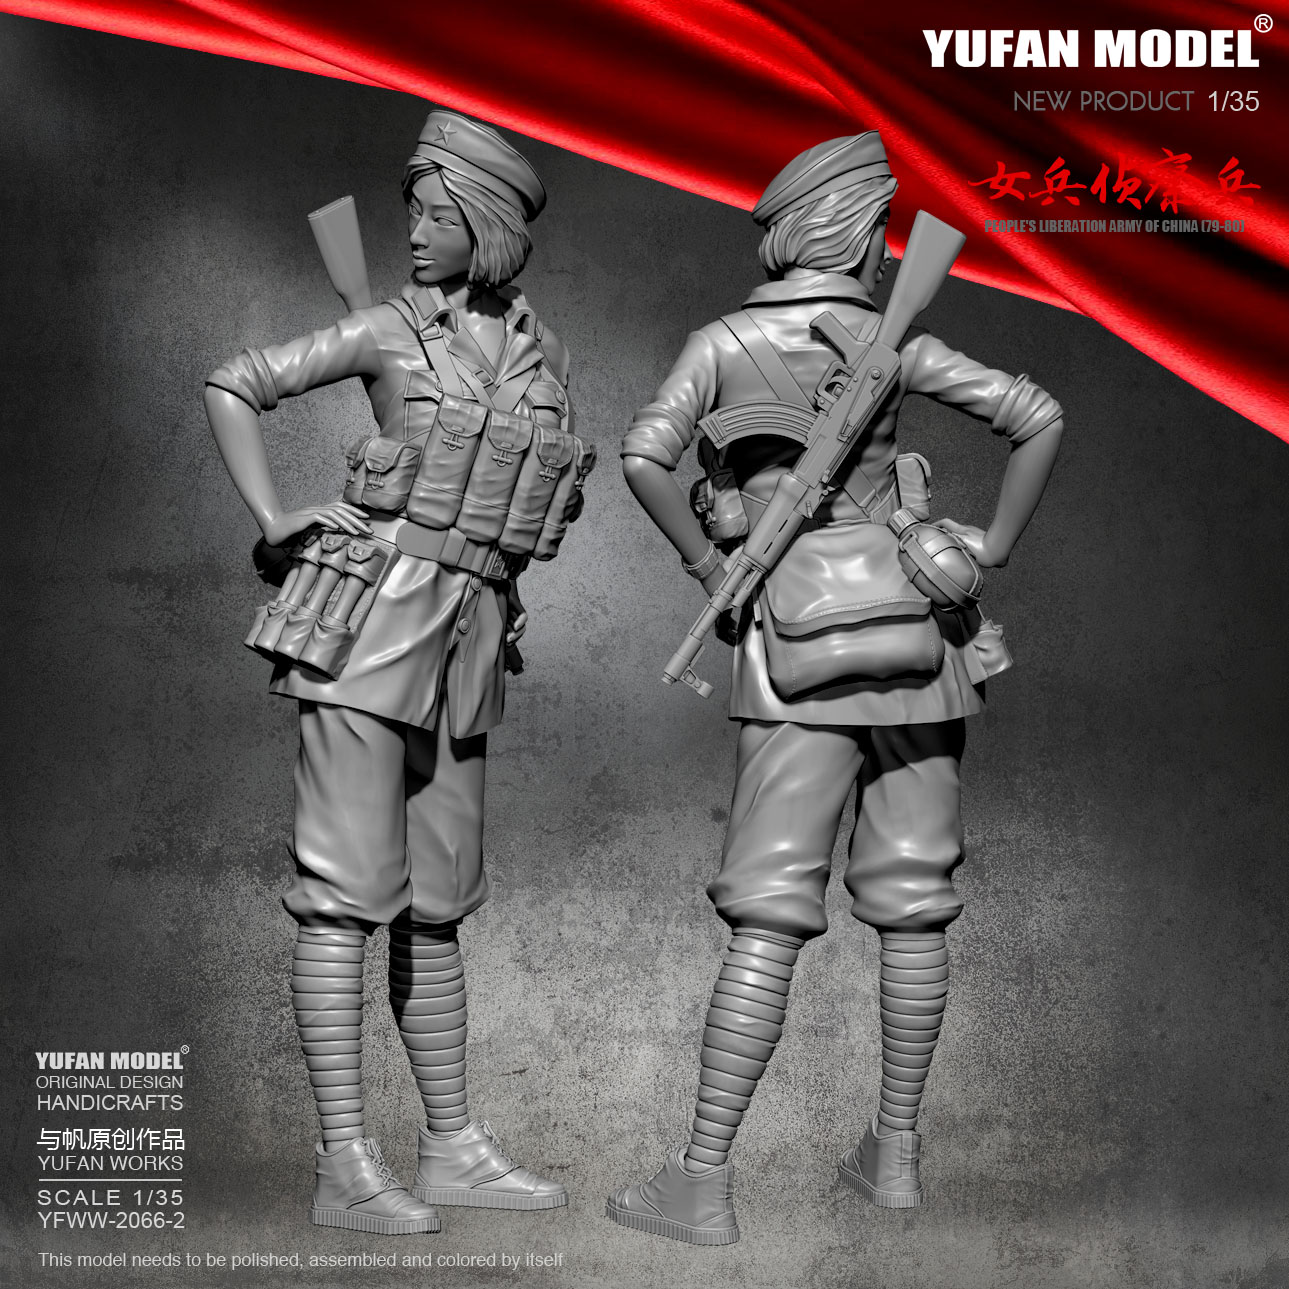 1/35 Chinese Female scout Soldier Resin Figure Kits yufan models 